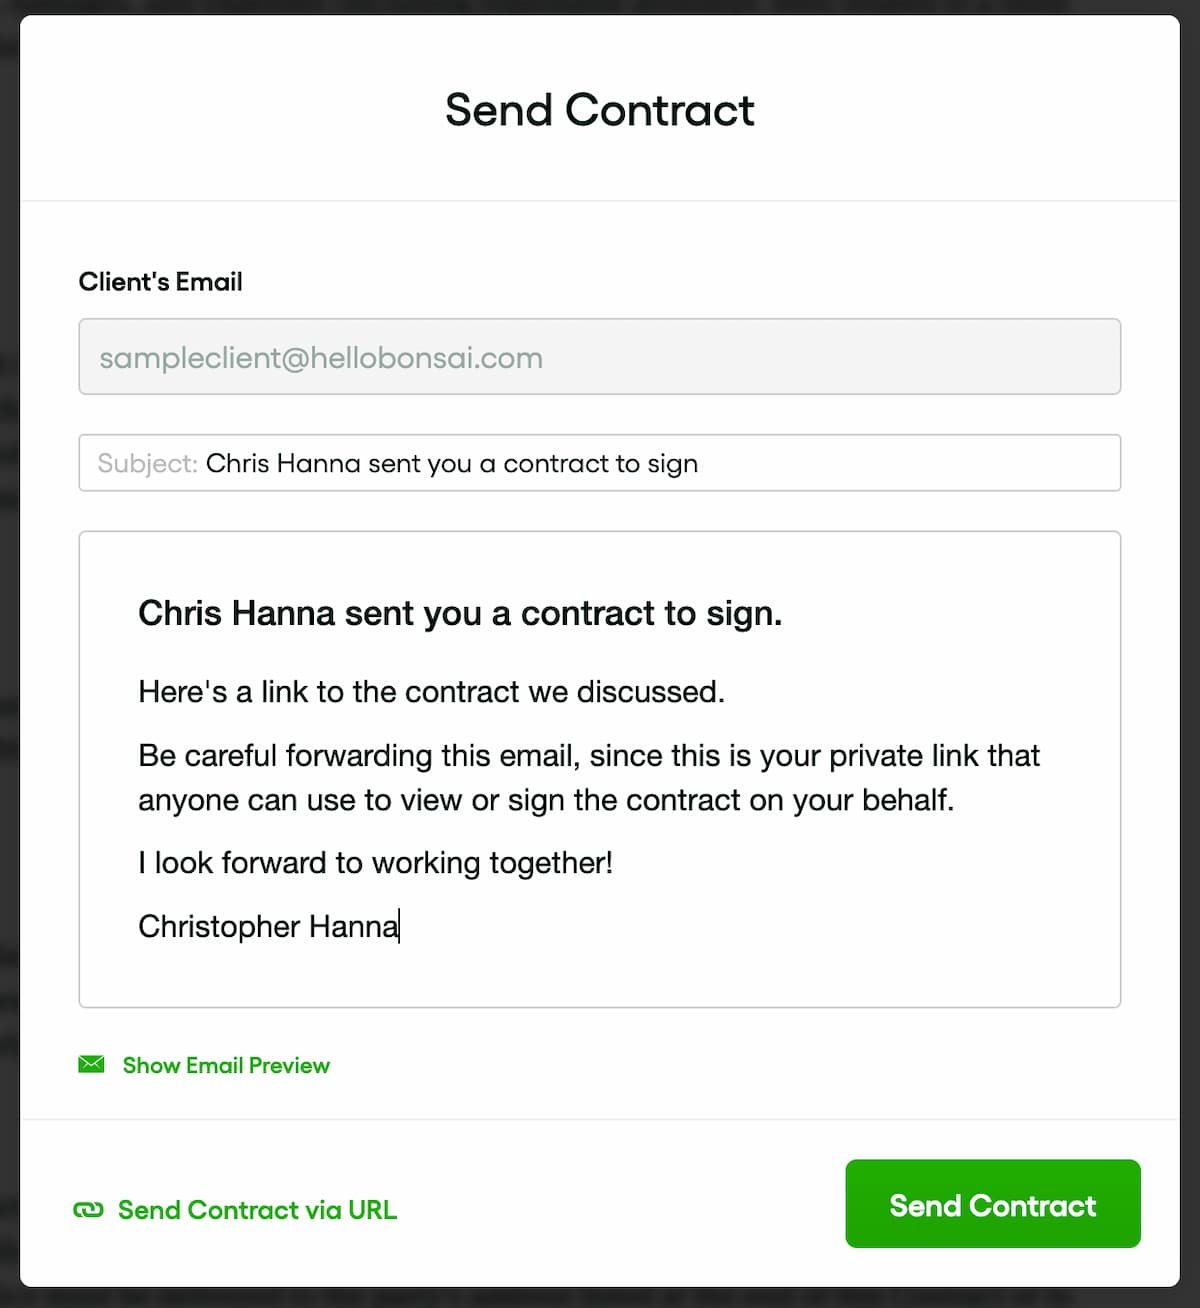 Screen showing the option to send your contract to a client through Bonsai.